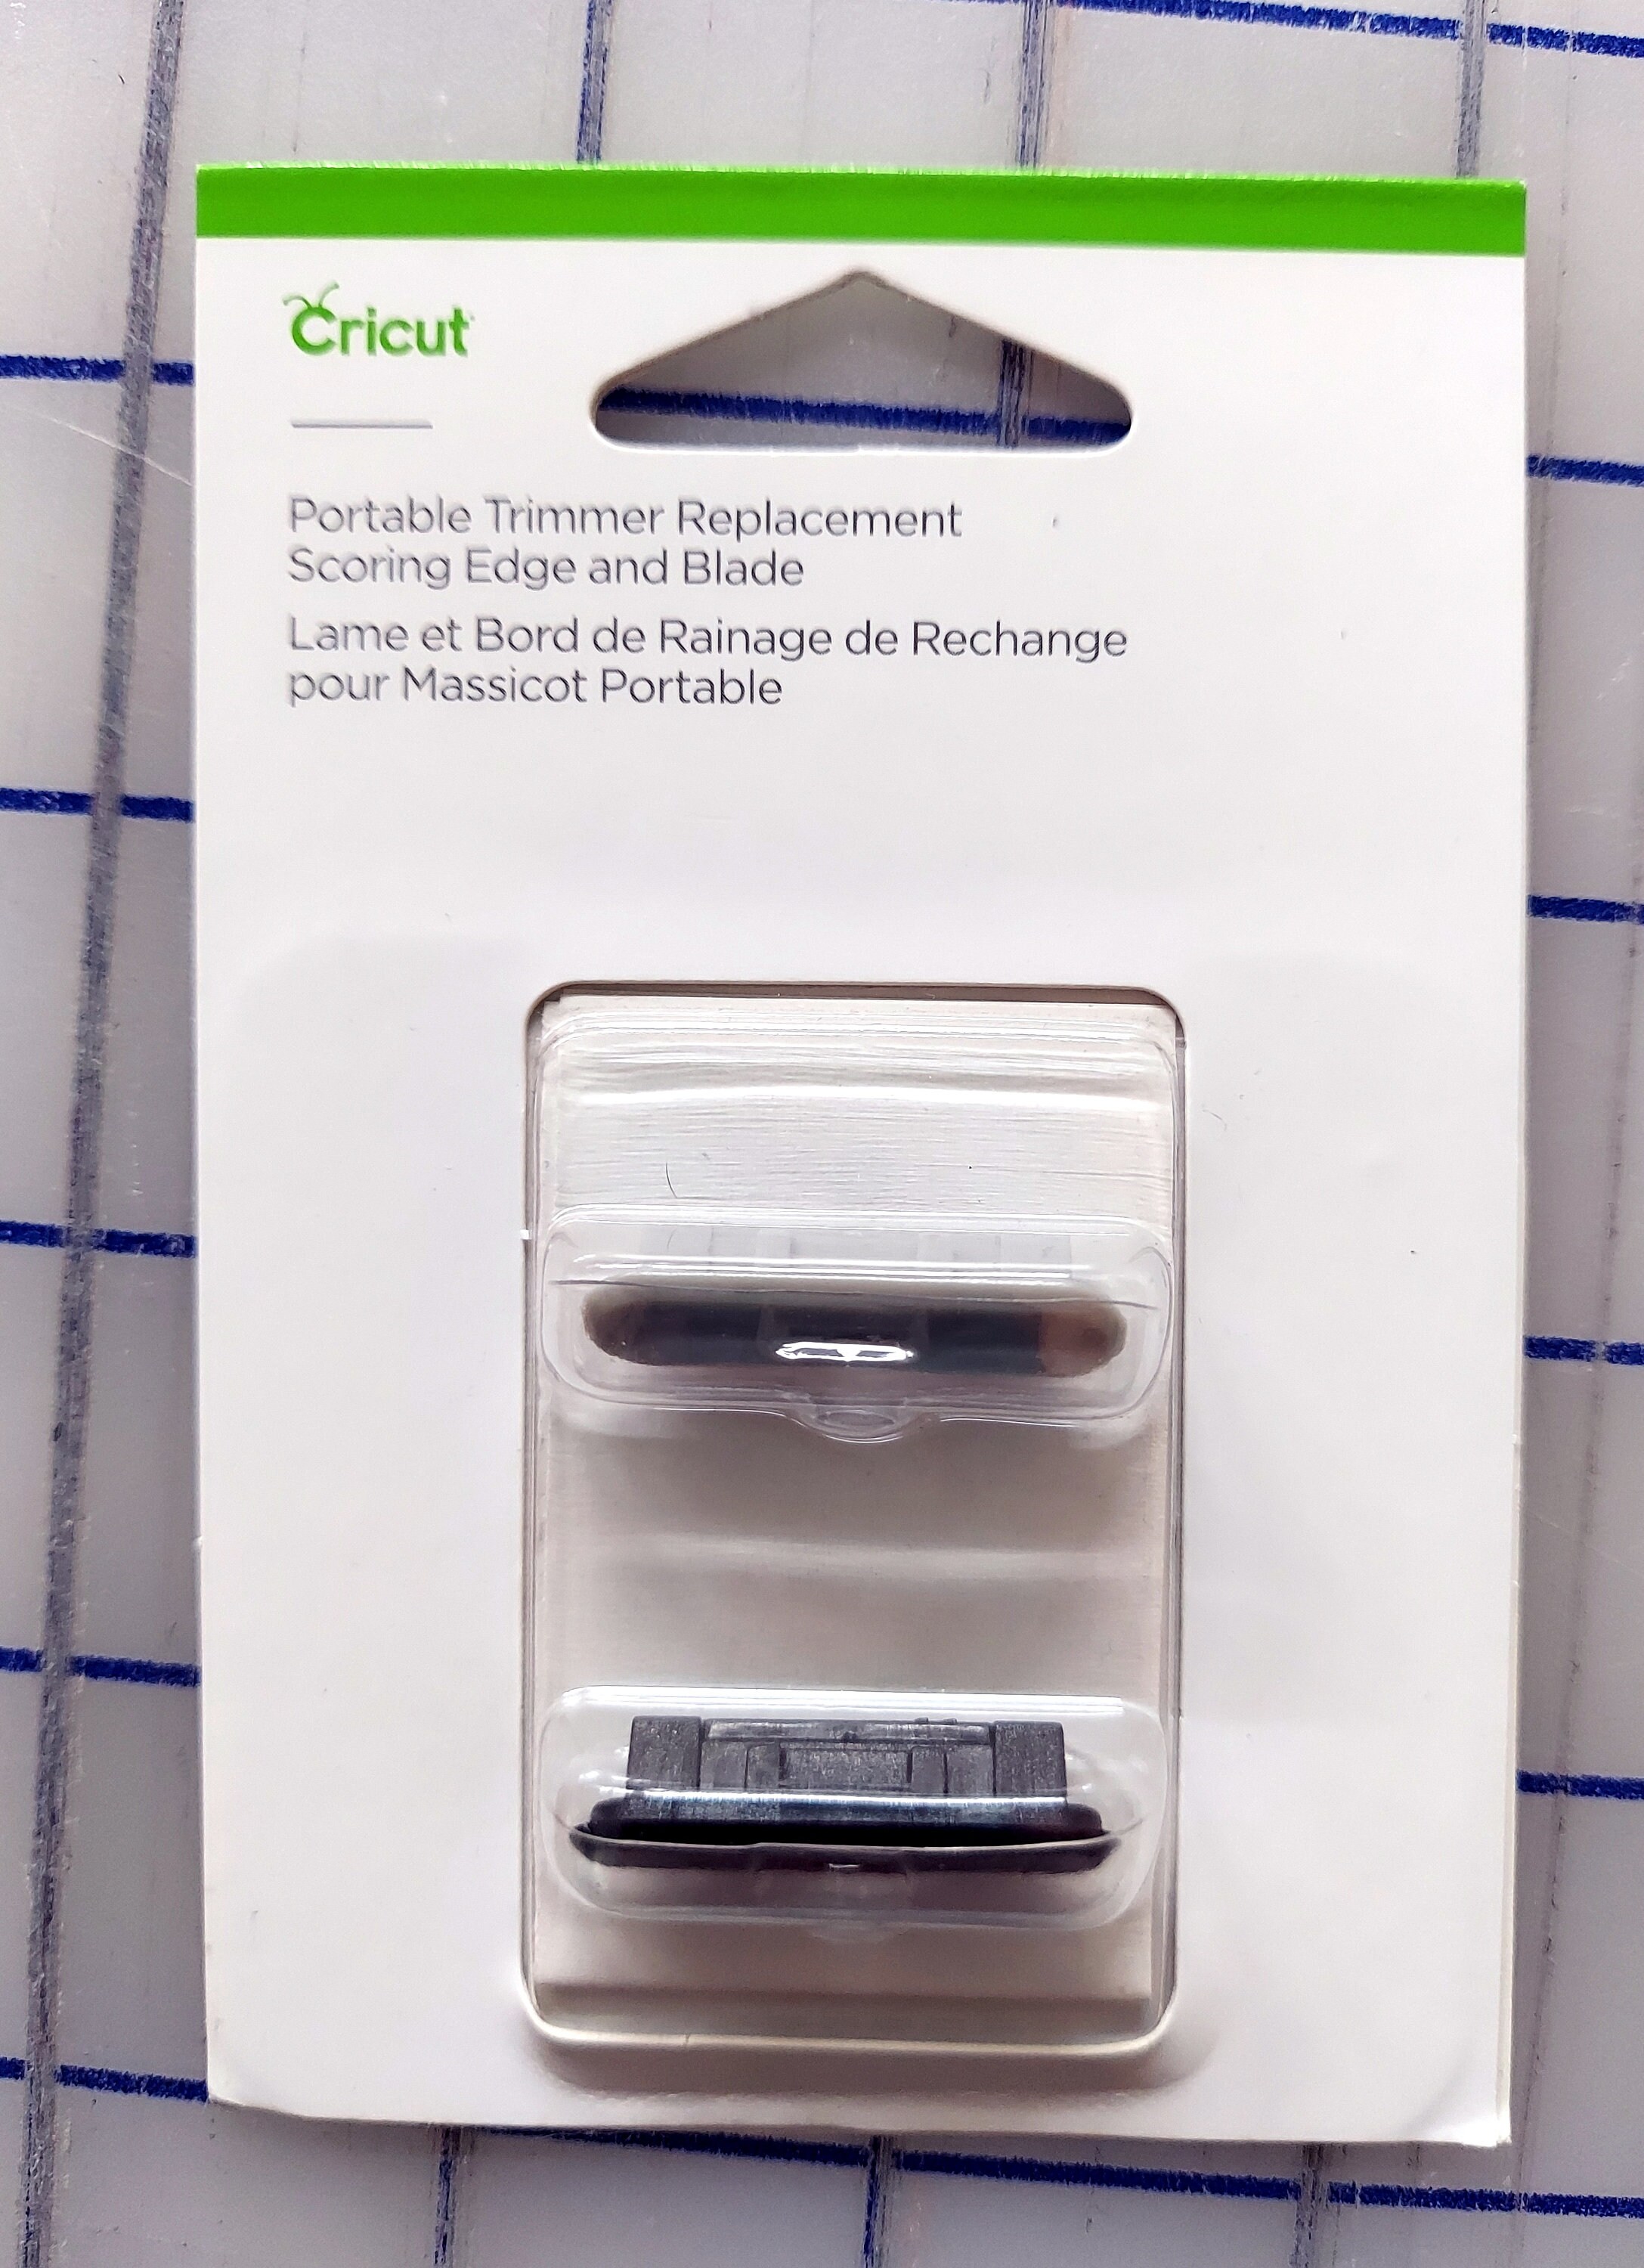 Cricut Portable Trimmer Replacement Scoring Edge and Blade by Provo Craft 